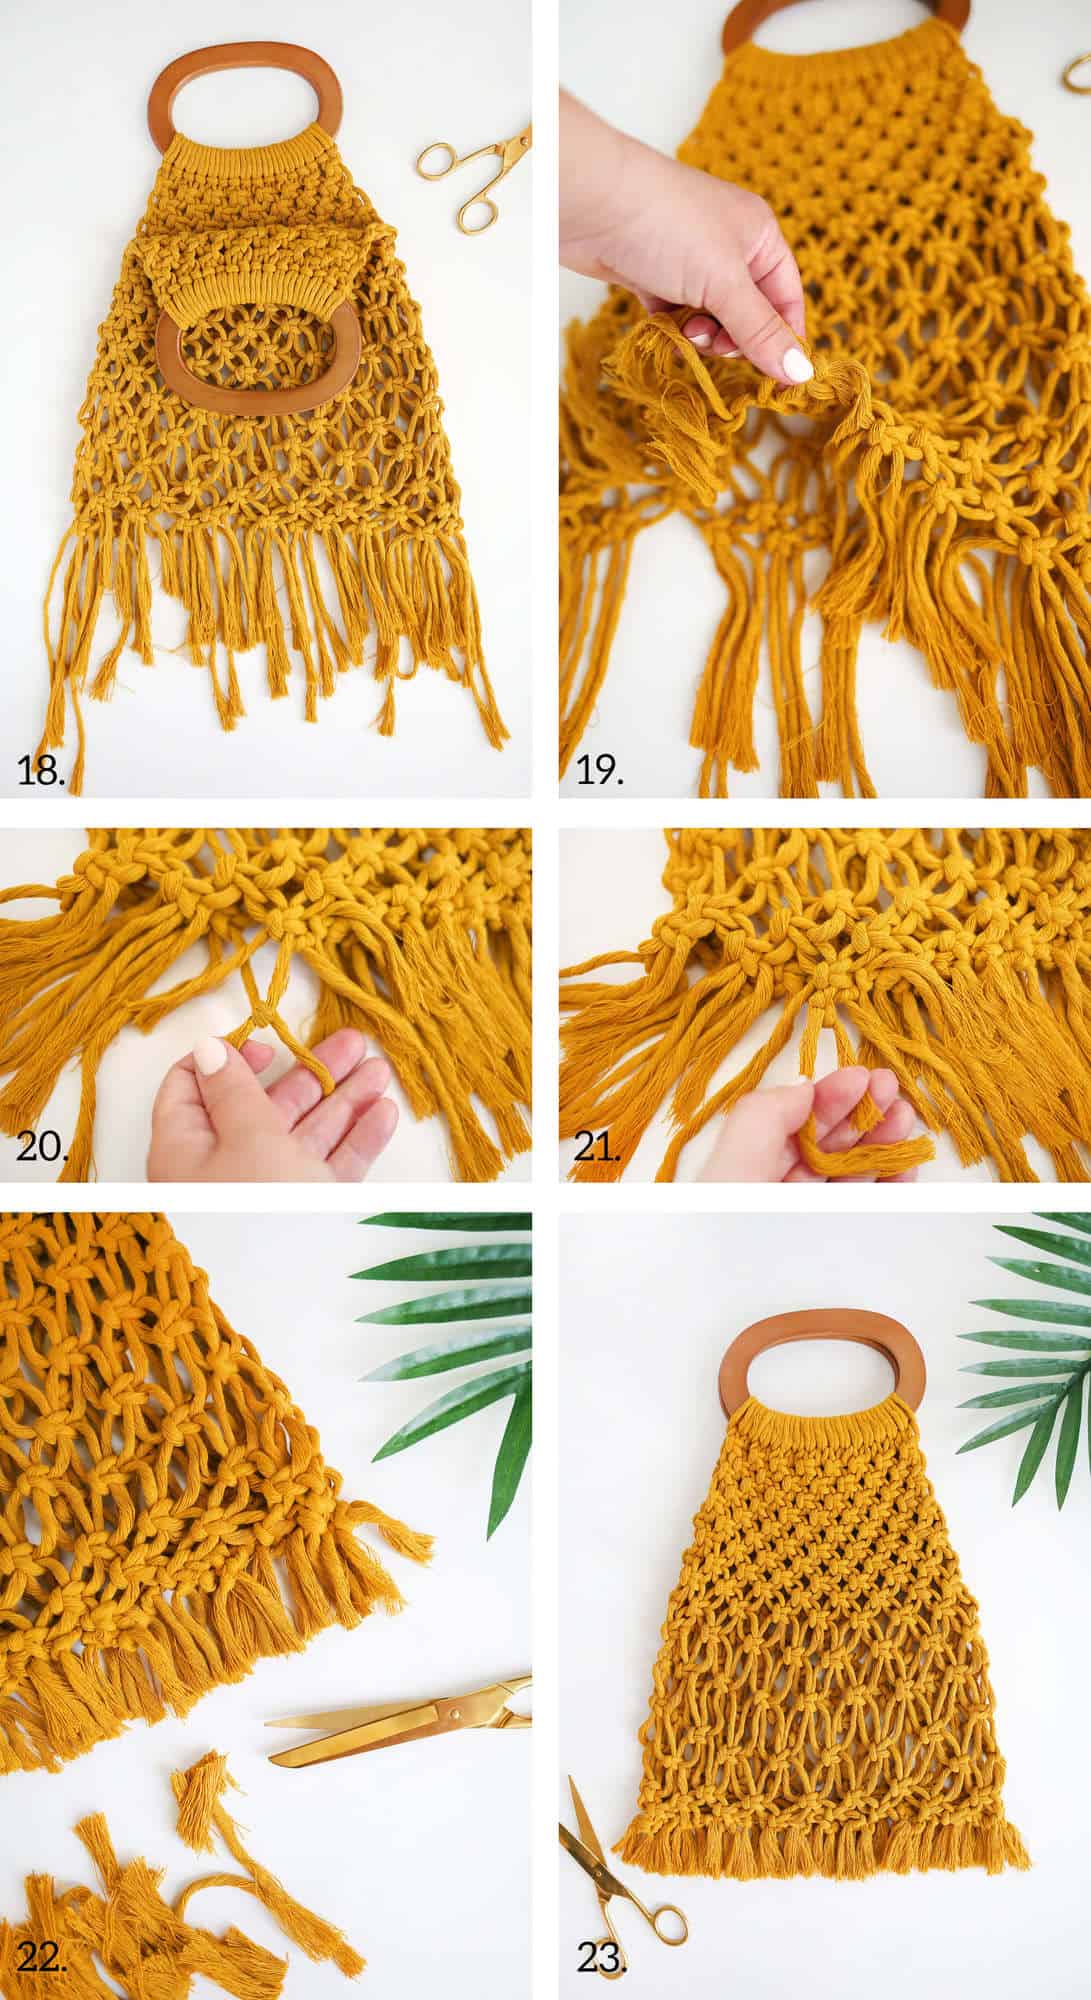 photo 18 - yellow cotton cord tied together with 2 wooden round handles, photo 19 - bottom of yellow cotton cord, photo 20 - someone tying the bottom of yellow cotton cord together, photo 21 - someone tying the bottom of the yellow cotton cord together, photo 22 - cut off pieces of yellow cotton cord with scissors, and photo 23 - completed macrame handbag with gold scissors next to it